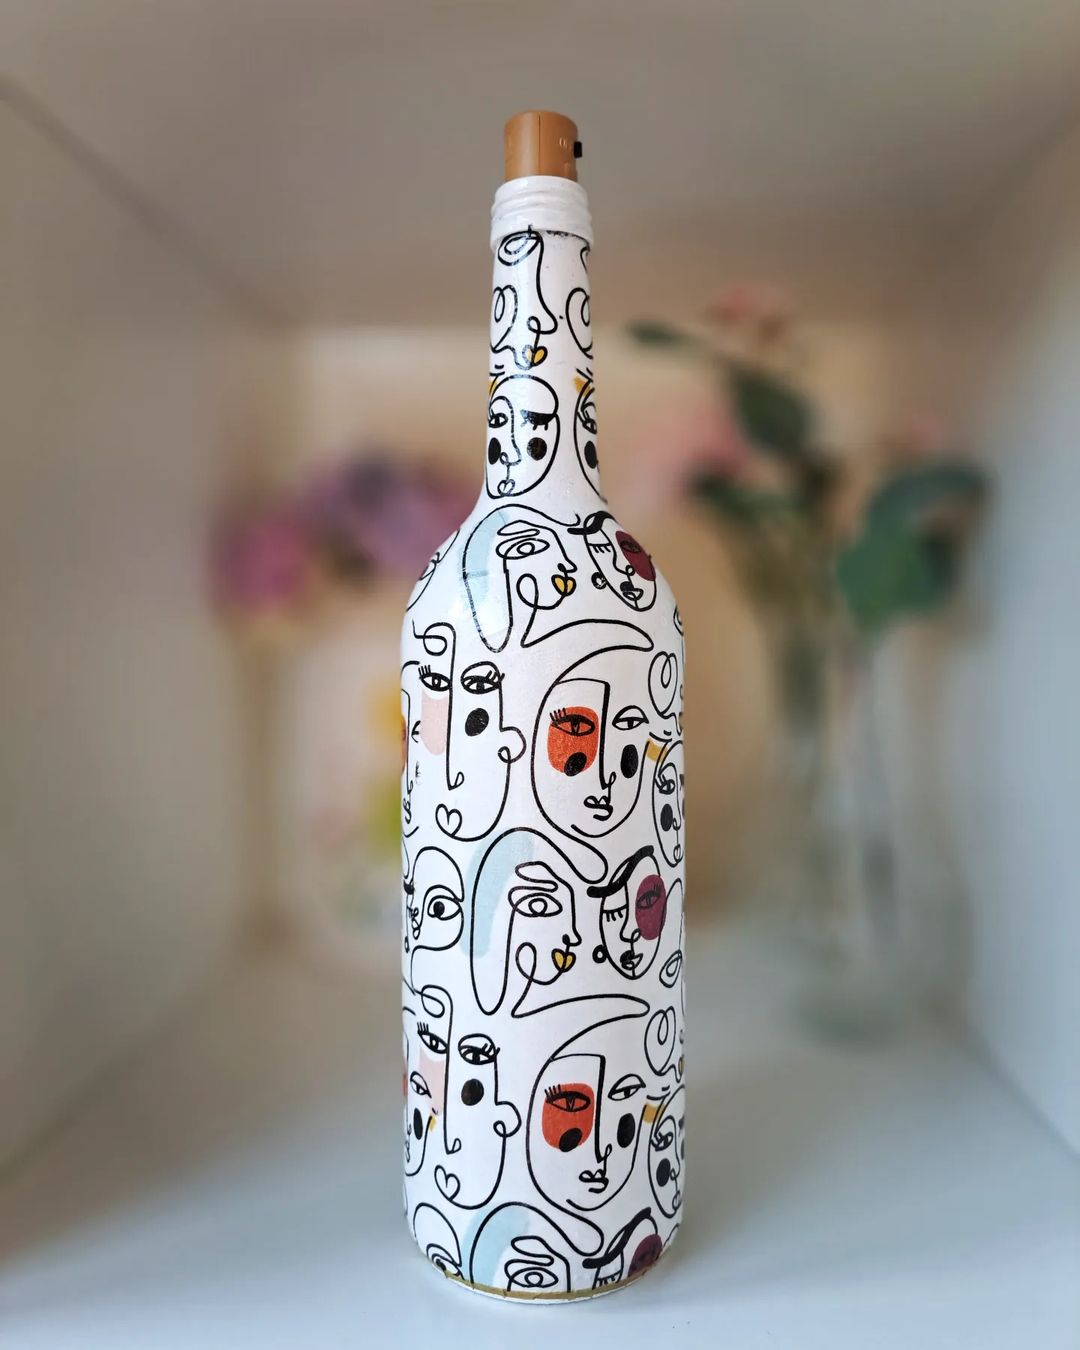 4. Bottle decorated with abstract linework faces